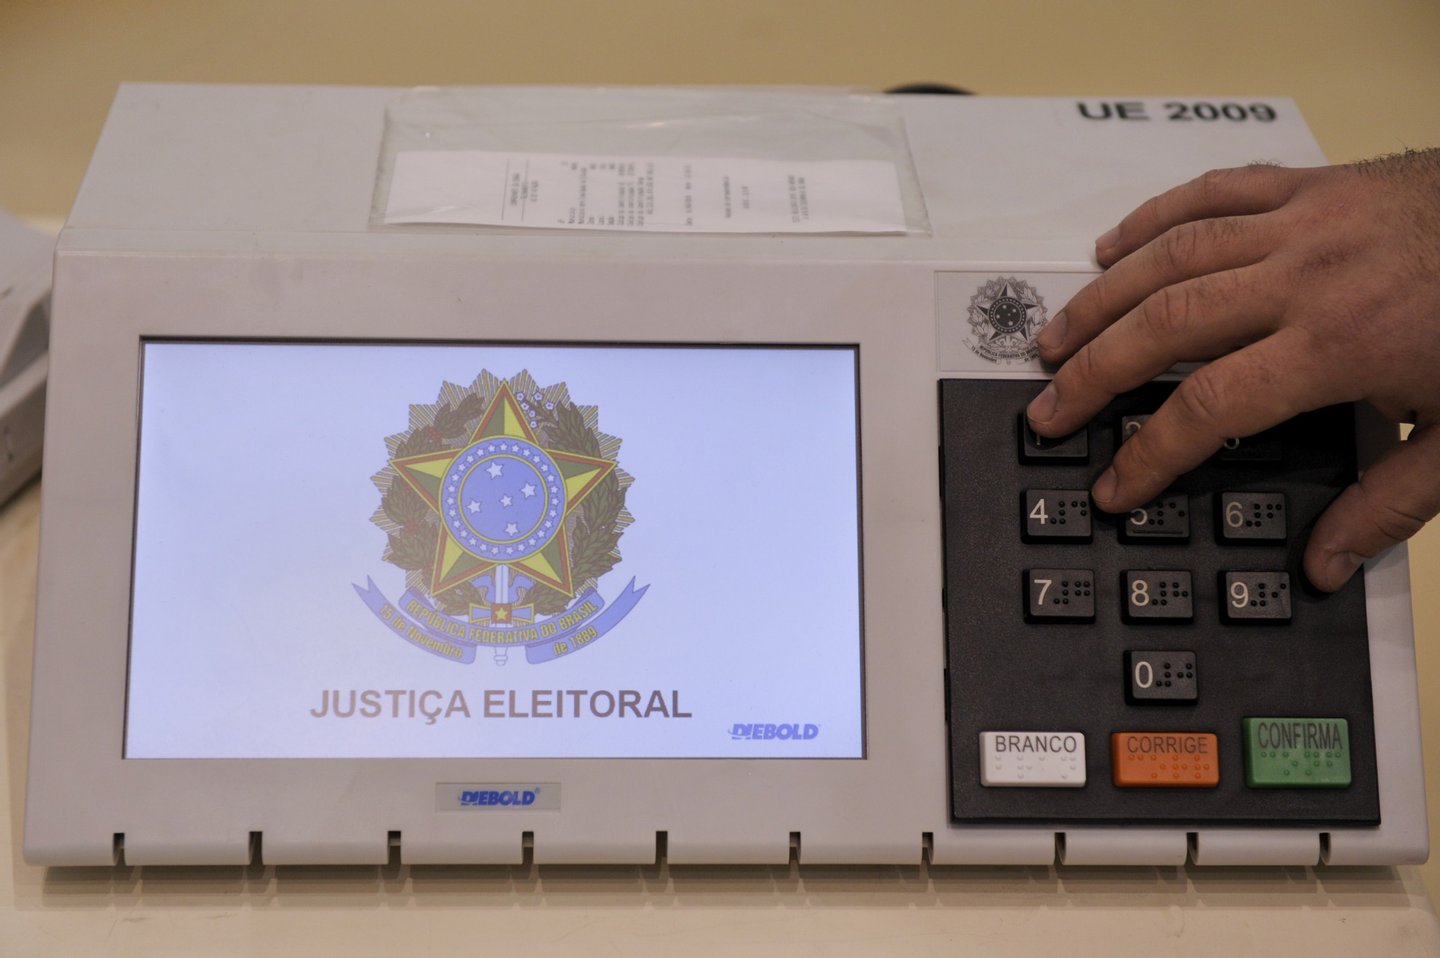 Brazilian researchers demonstrate how to carry out a series of simulated tests to certify the that the electronic voting machines to be used in next October's election work according to the requirements and are not submitted to any fraudulent manipulation, during a press conference at the National Institute for Space Research (INPE) headquarters, in Sao Jose dos Campos, some 90 km north of Sao Paulo, Brazil, on September 8, 2010. Brazil's general elections are scheduled for October 3. AFP PHOTO/Mauricio LIMA (Photo credit should read MAURICIO LIMA/AFP/Getty Images)